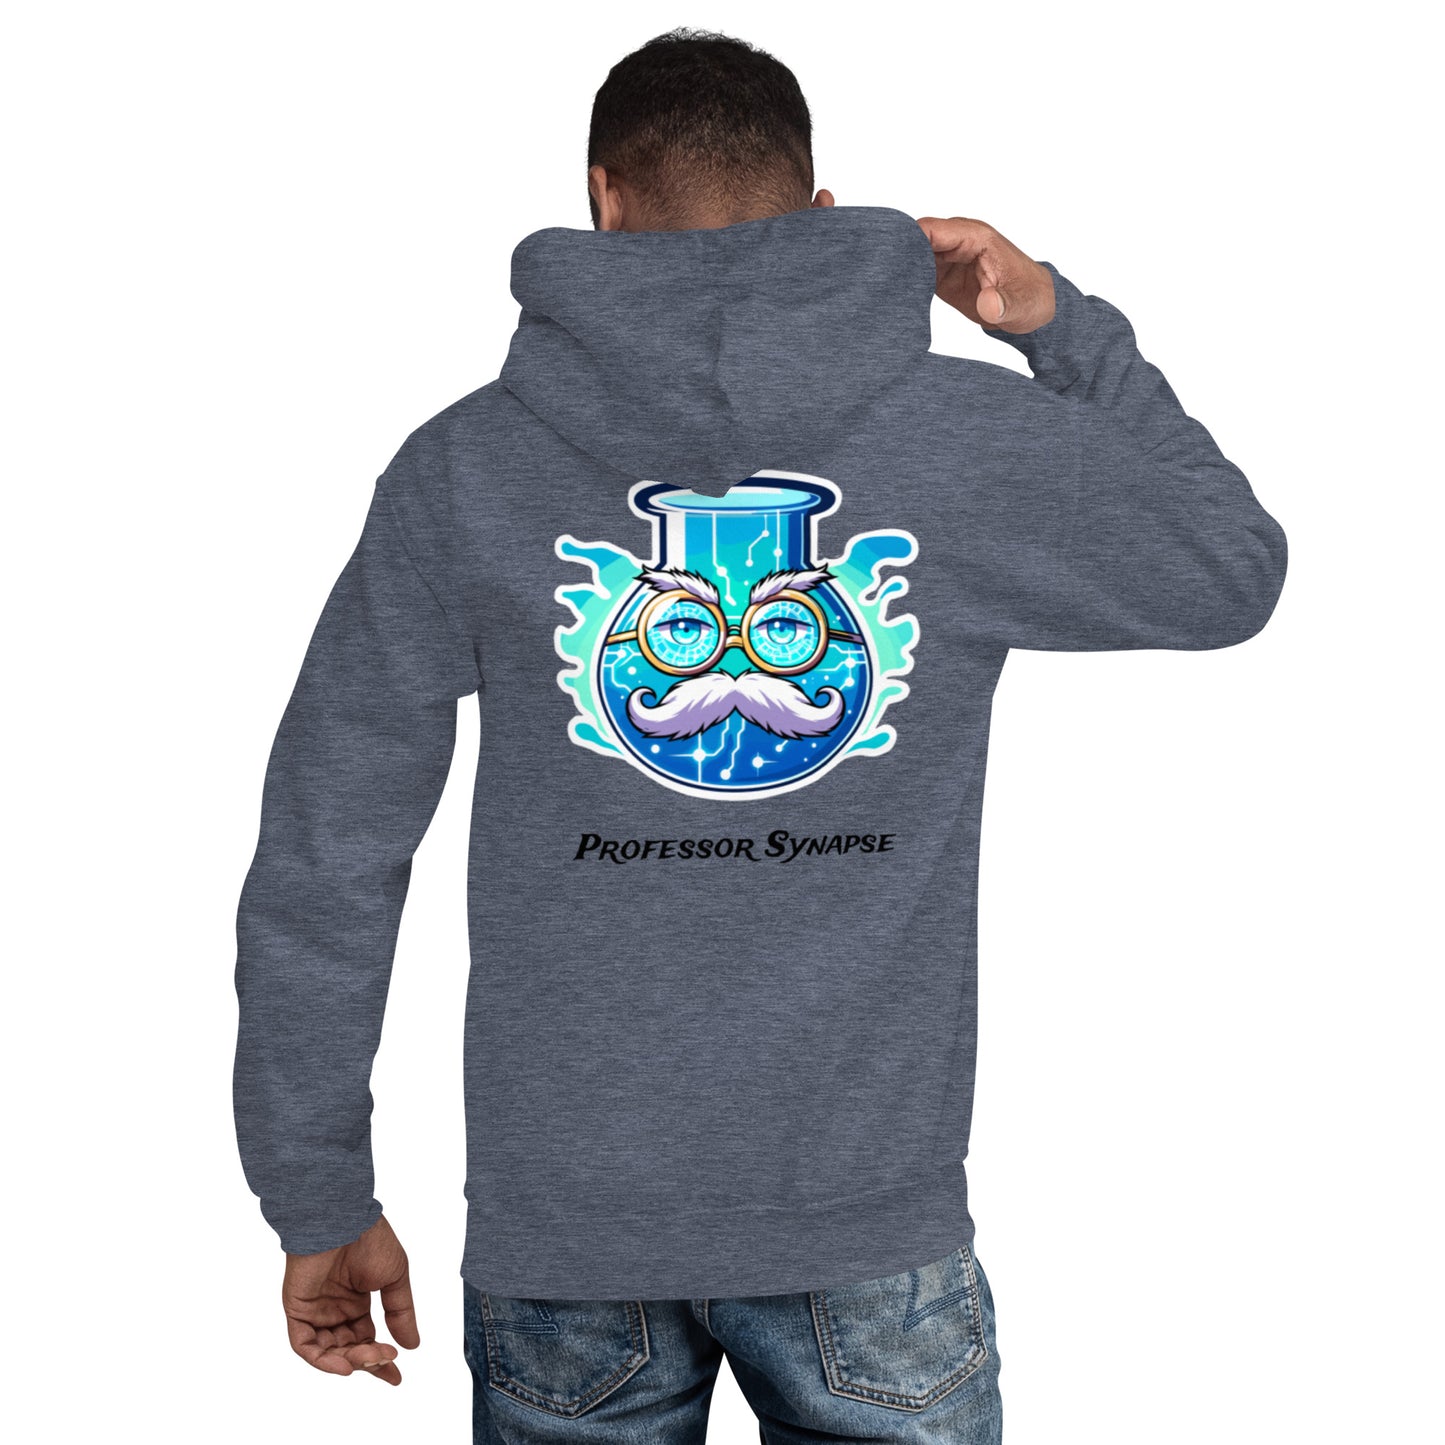 Synaptic Hoodie